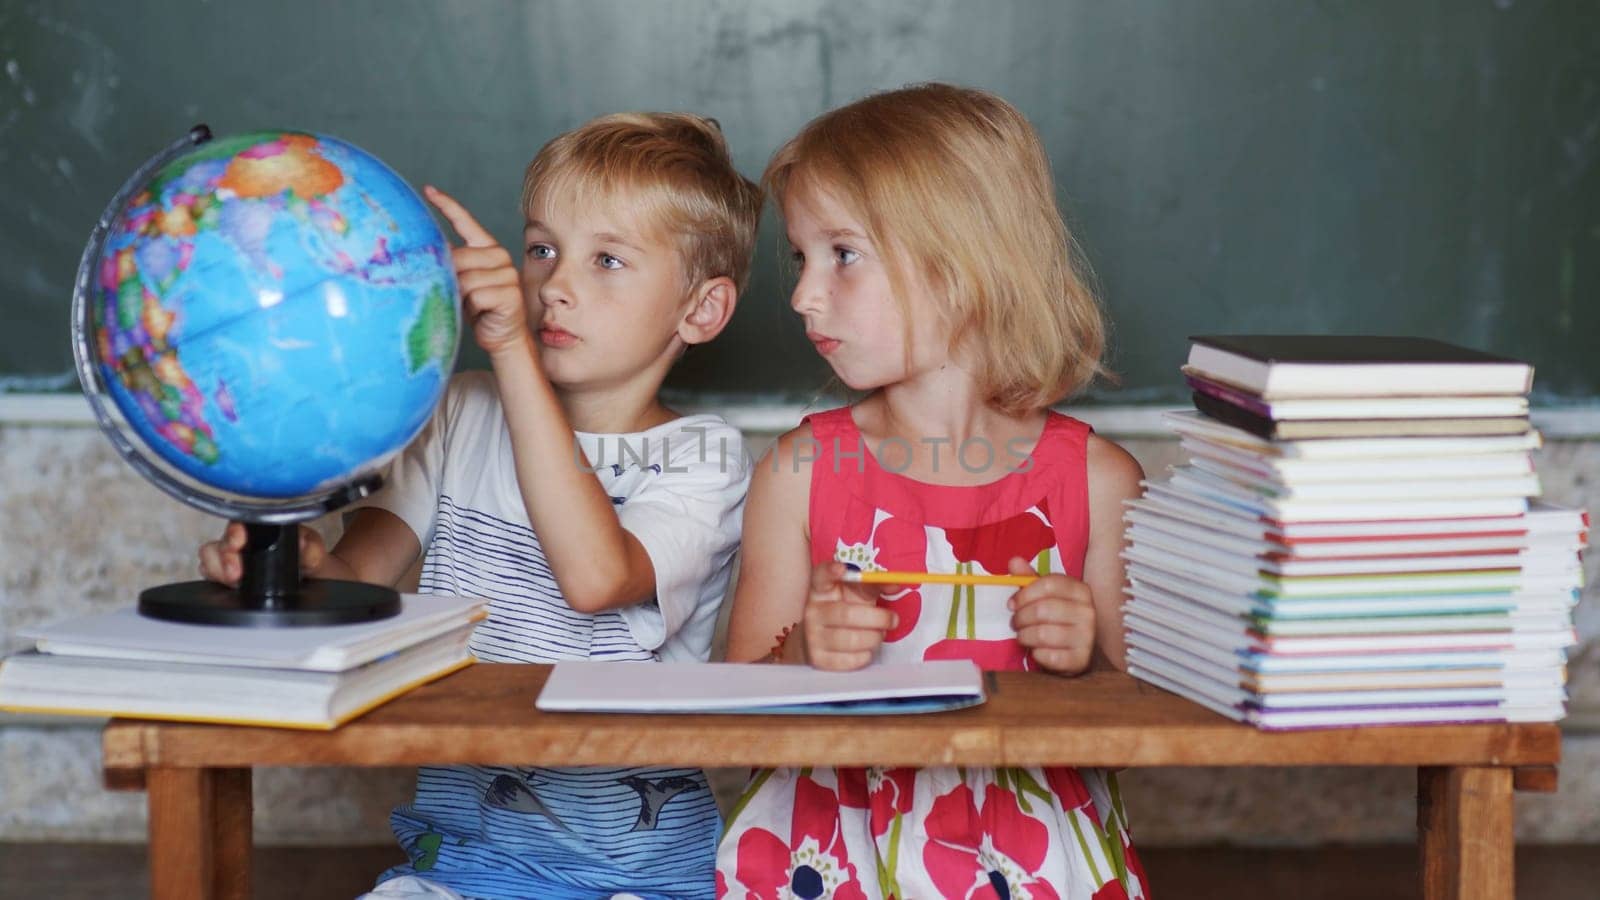 Brother and sister study at home with a world globe. by DovidPro